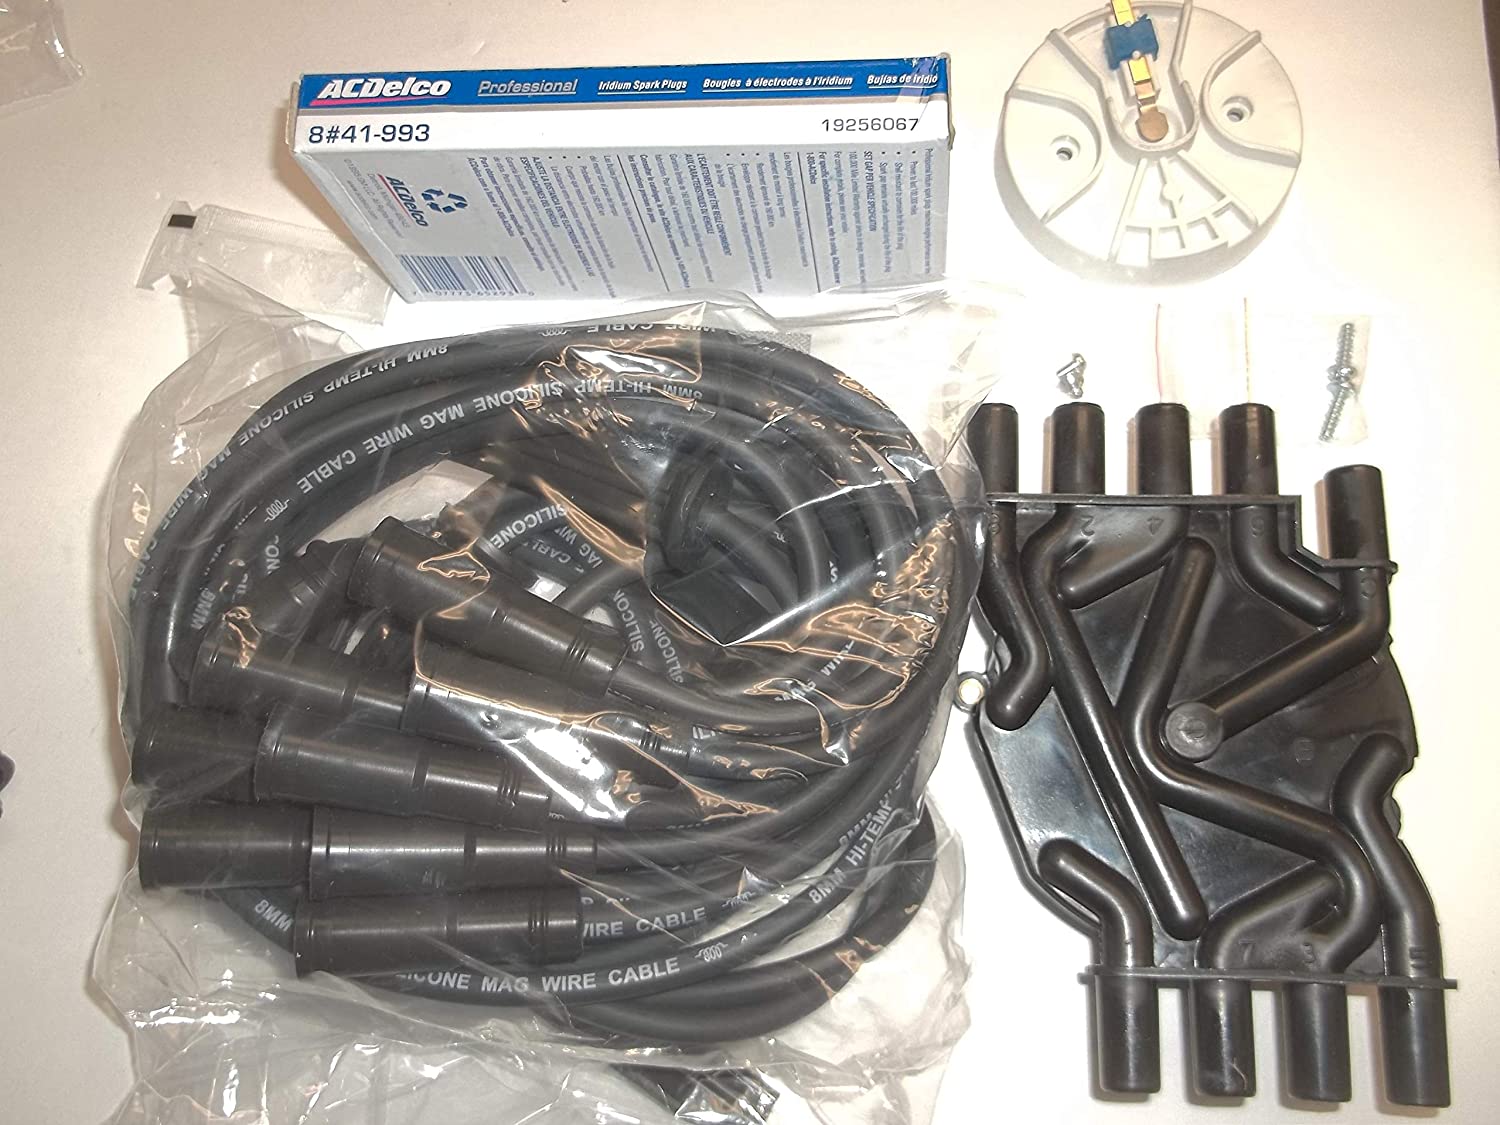 Distributor Cap, Rotor, Spark Plug Wires and AC Delco 41-993 Plugs. Tune up kit for Mercruiser 5.0 5.7 MPI MAG and Volvo Penta 5.0 5.7 GI GXI